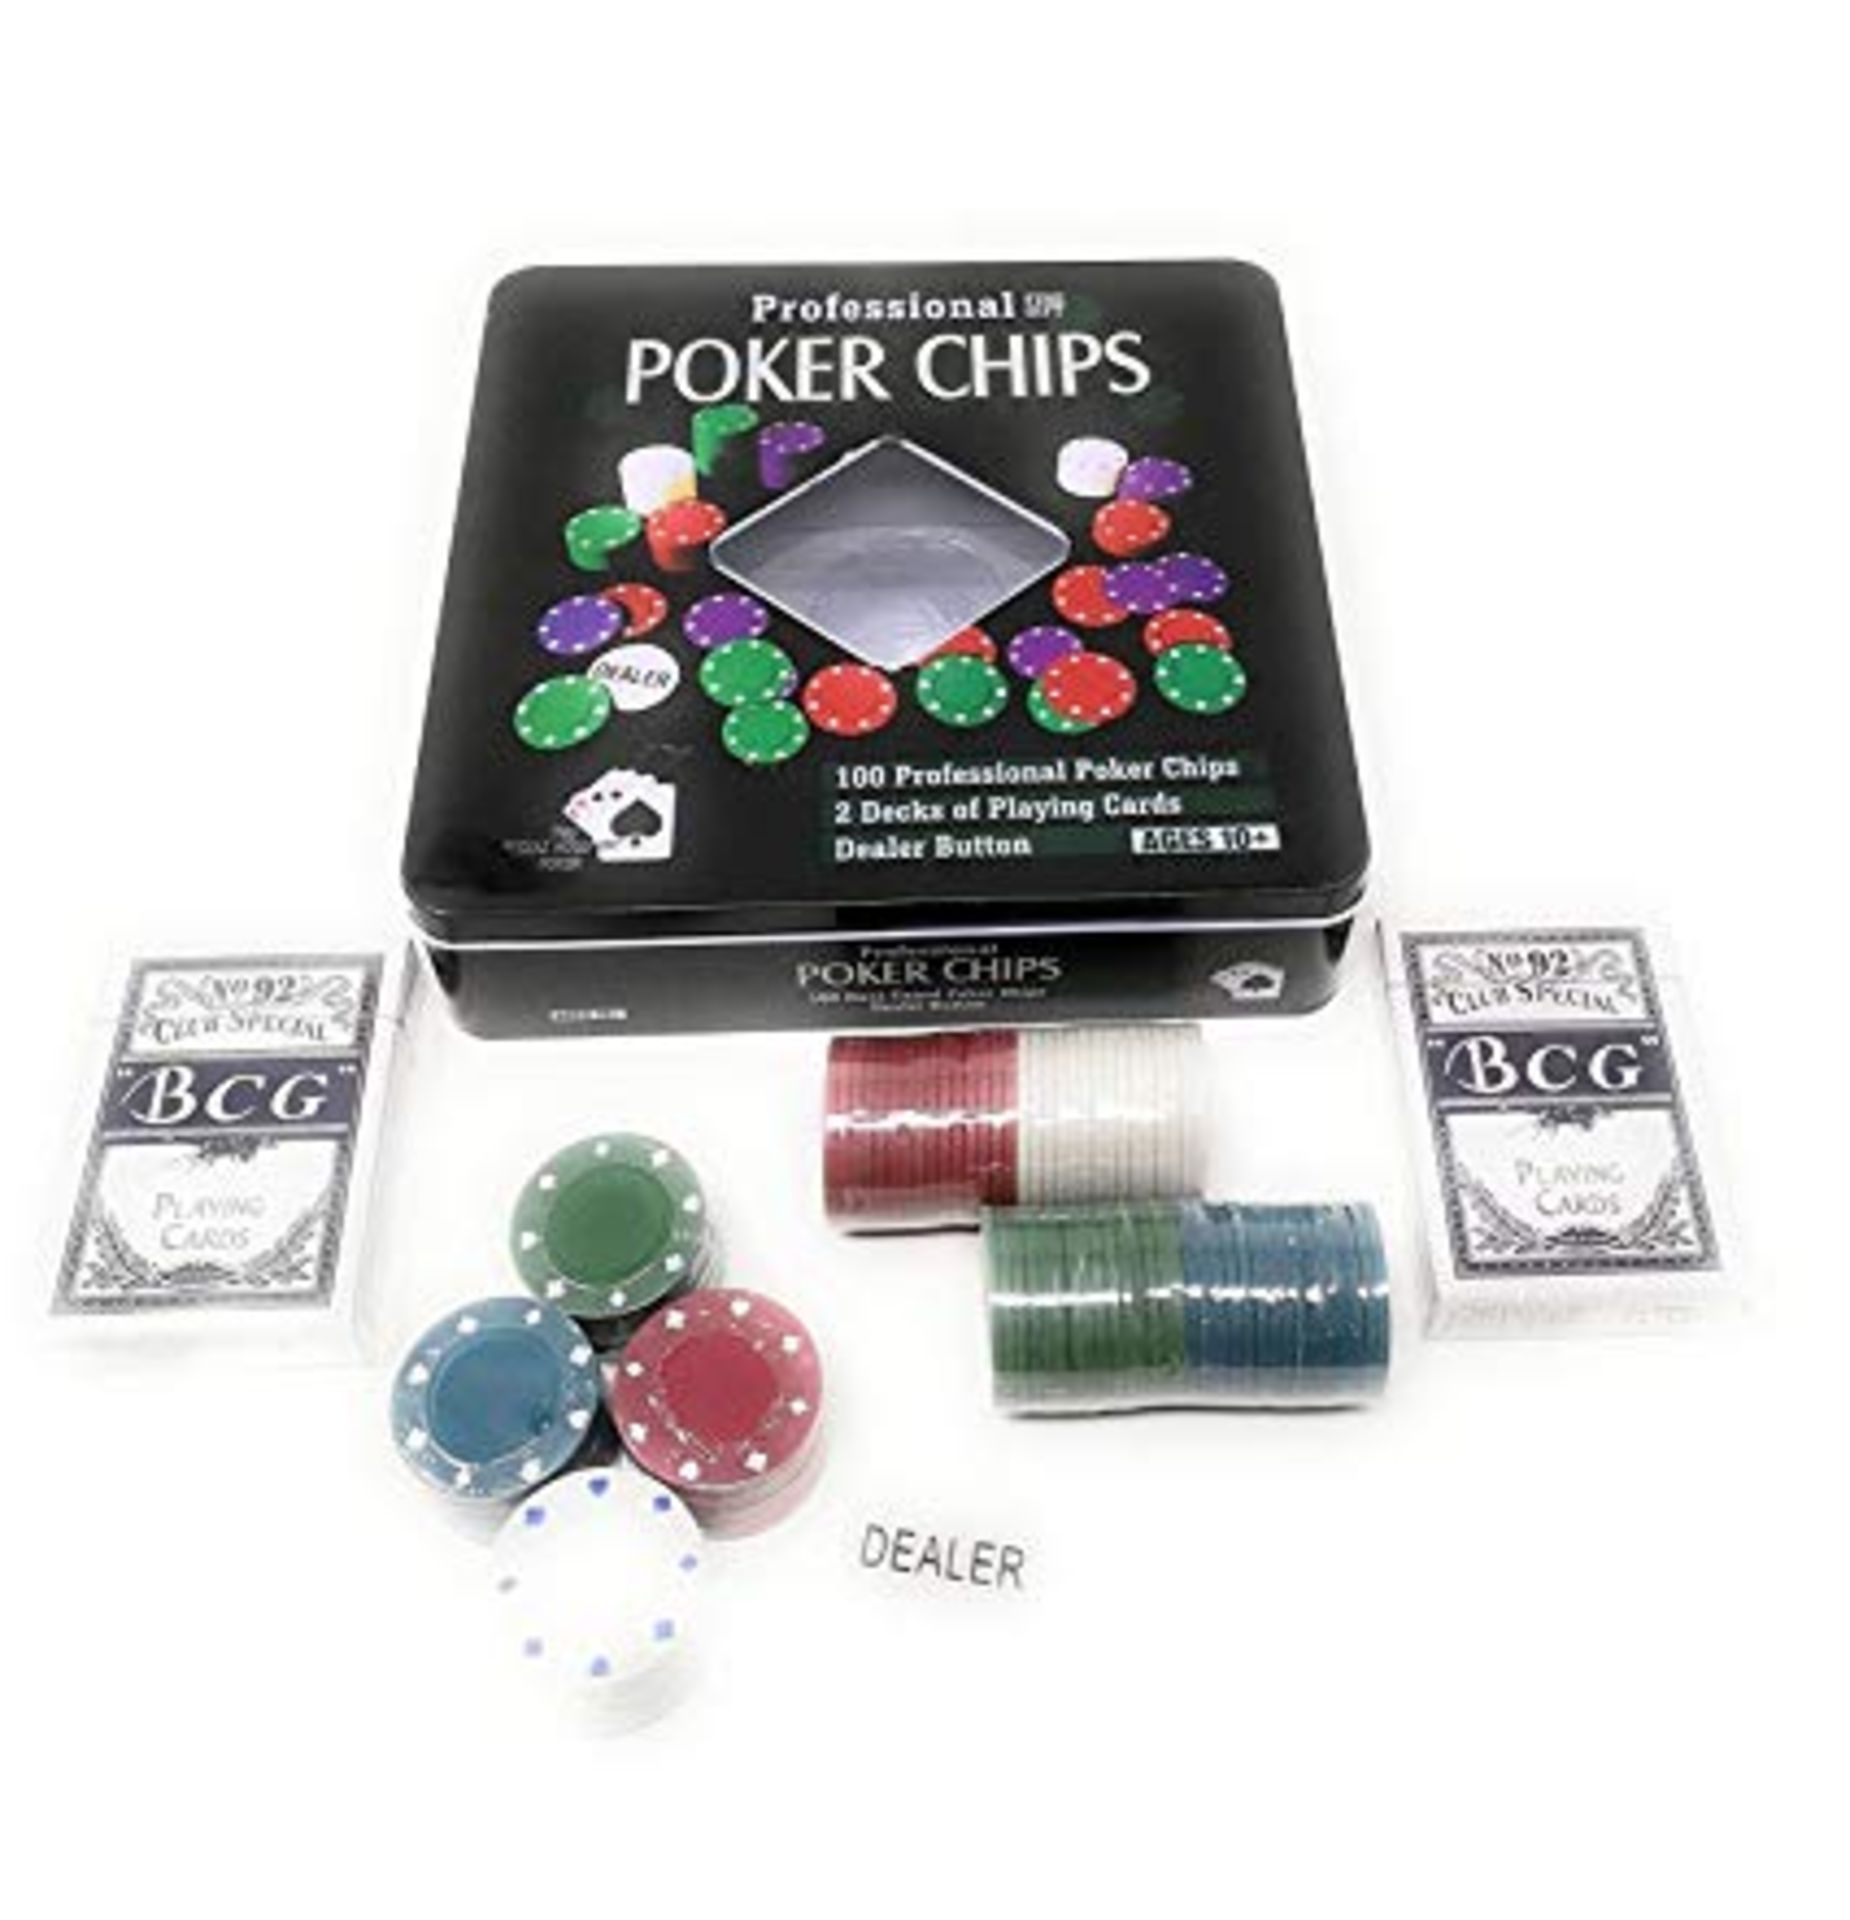 V Brand New Pro Casino Bundle - 100 Poker Chips - 2 Packs Of Playing Cards - Dealer Button In A